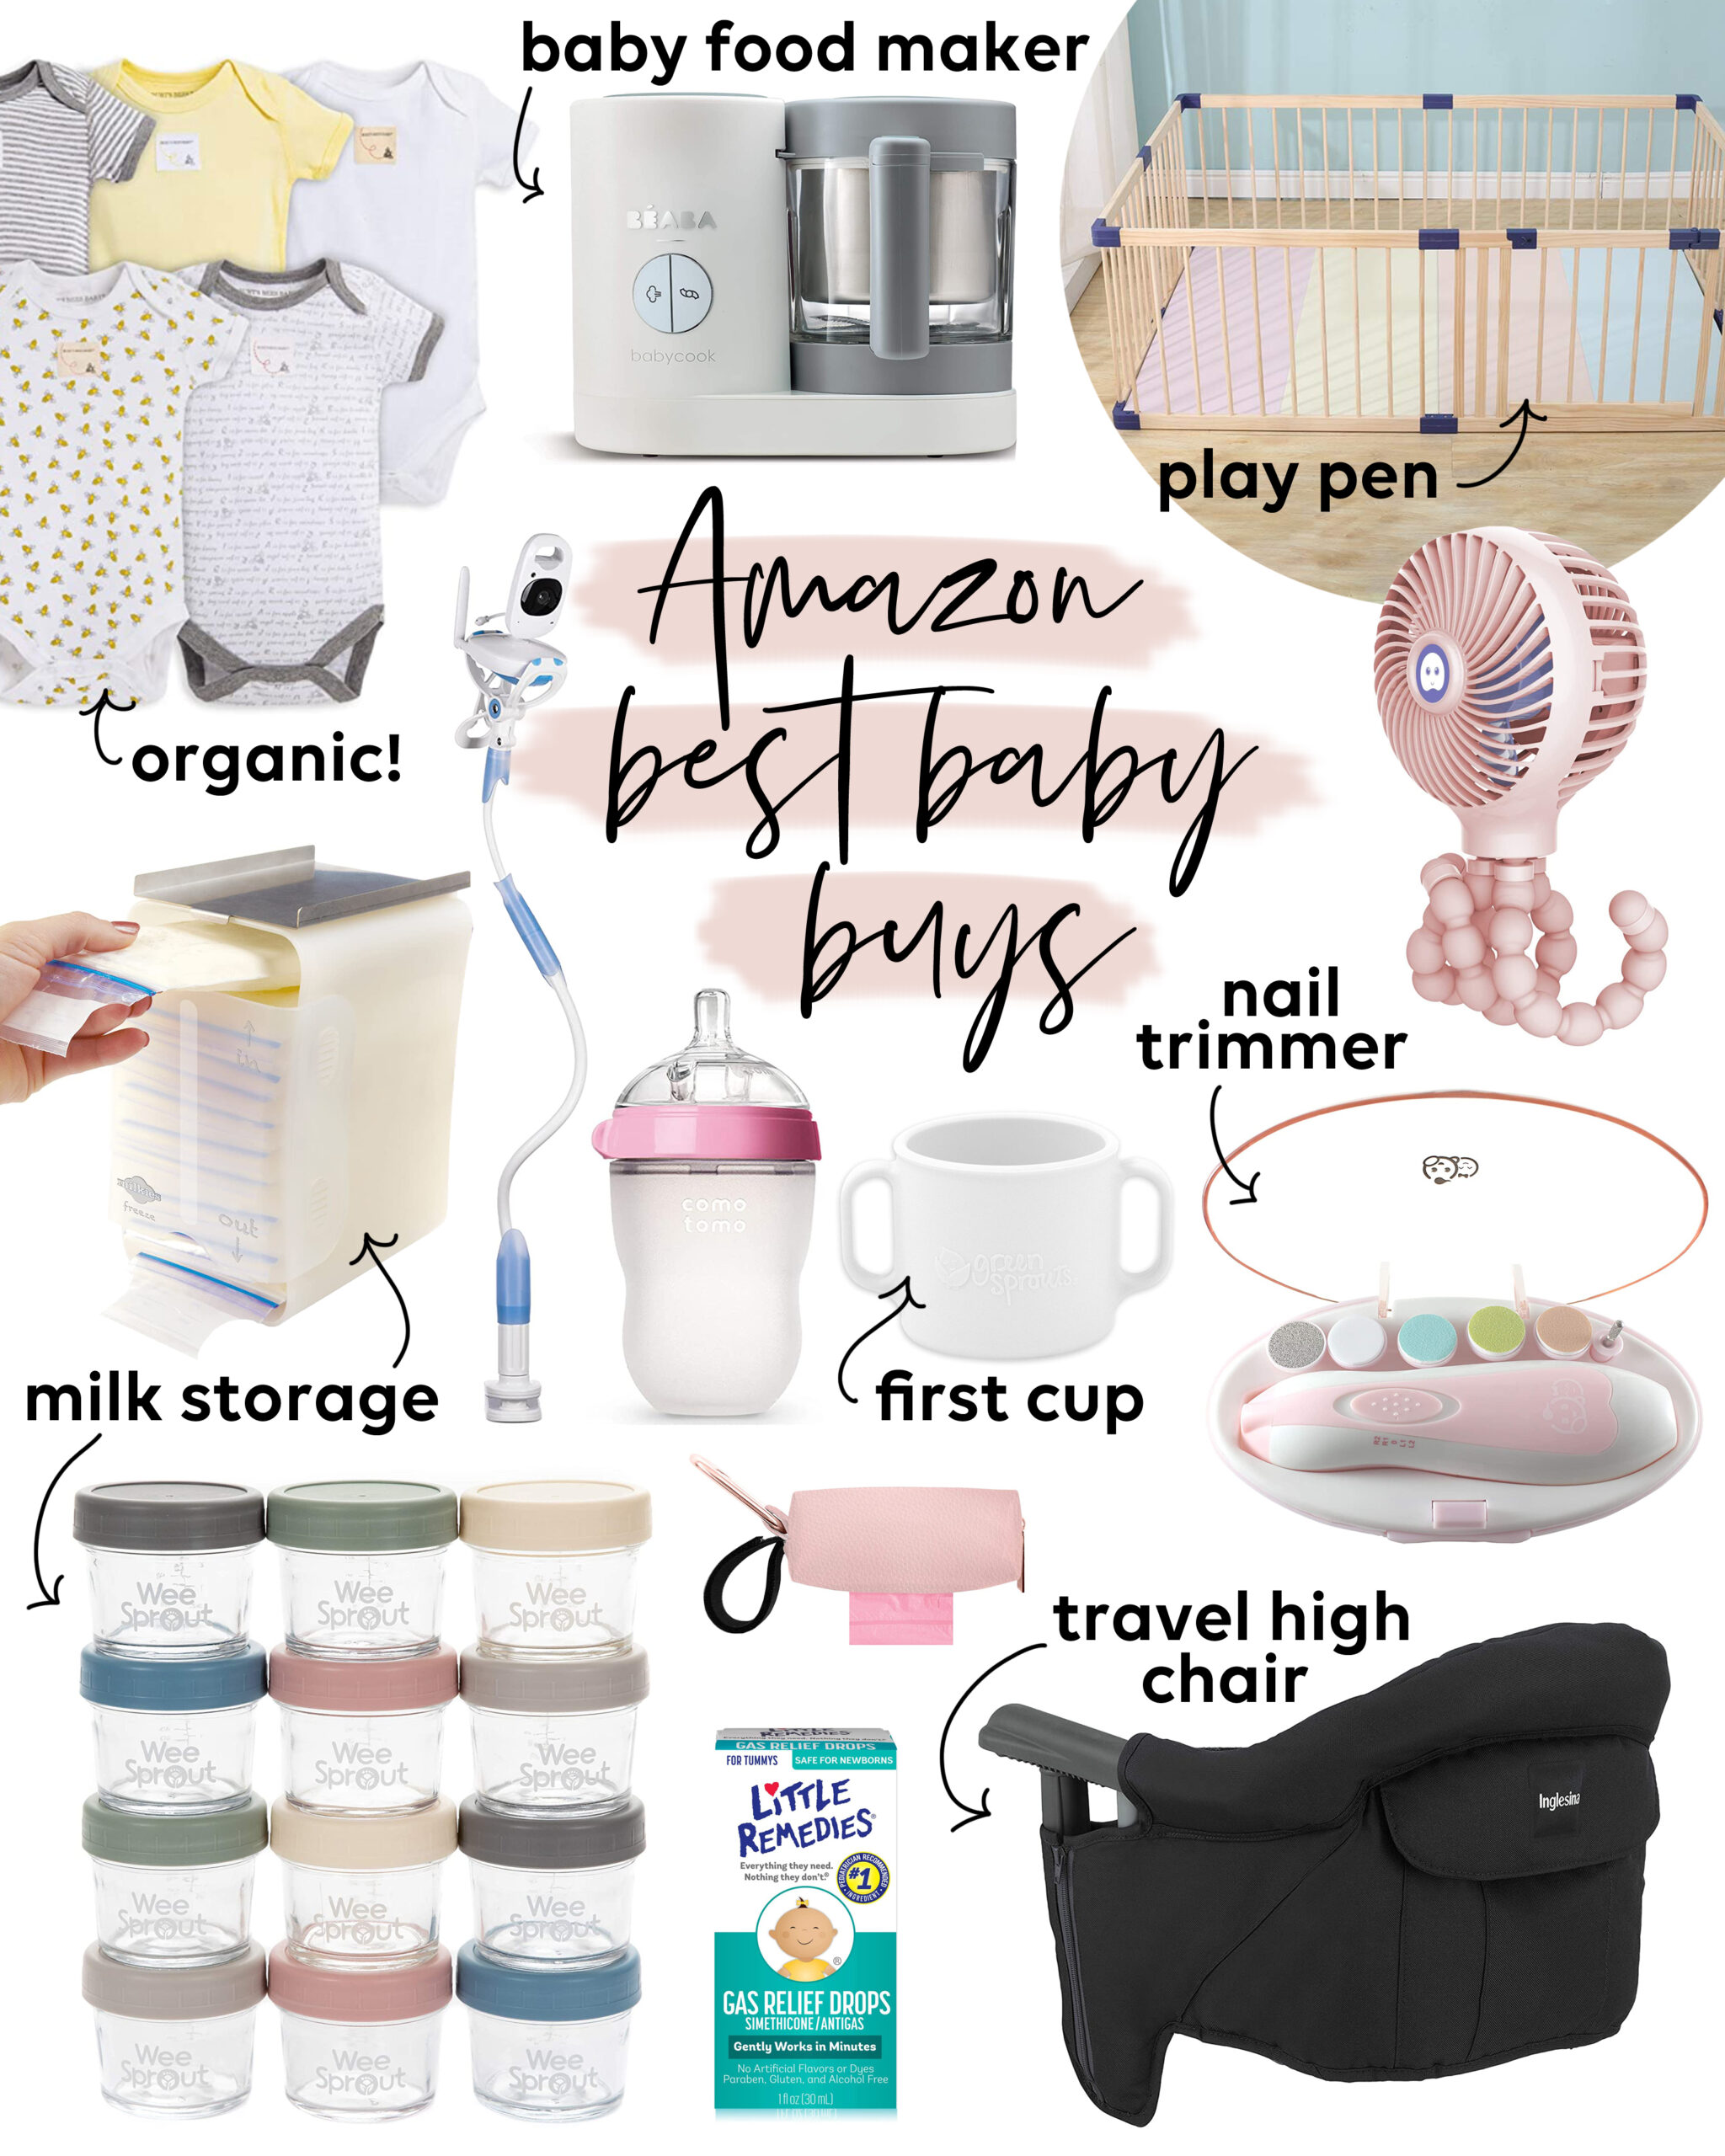 https://www.southerncurlsandpearls.com/wp-content/uploads/2022/01/amazon-best-baby-buys-2021-scaled.jpg